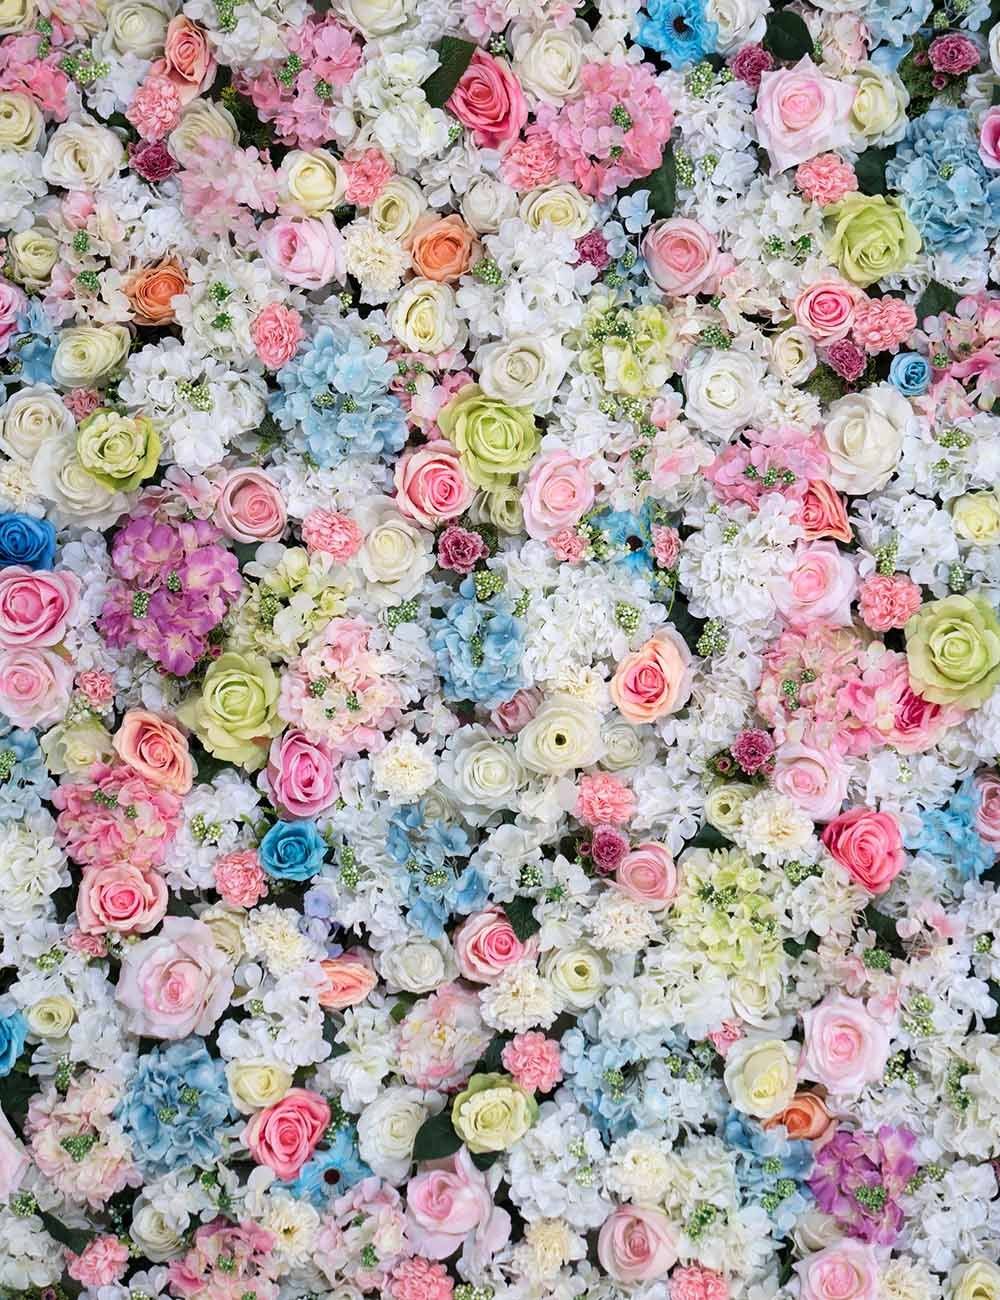 Abstract Colorful Flower Wall Photography Backdrop J-0690 Shopbackdrop